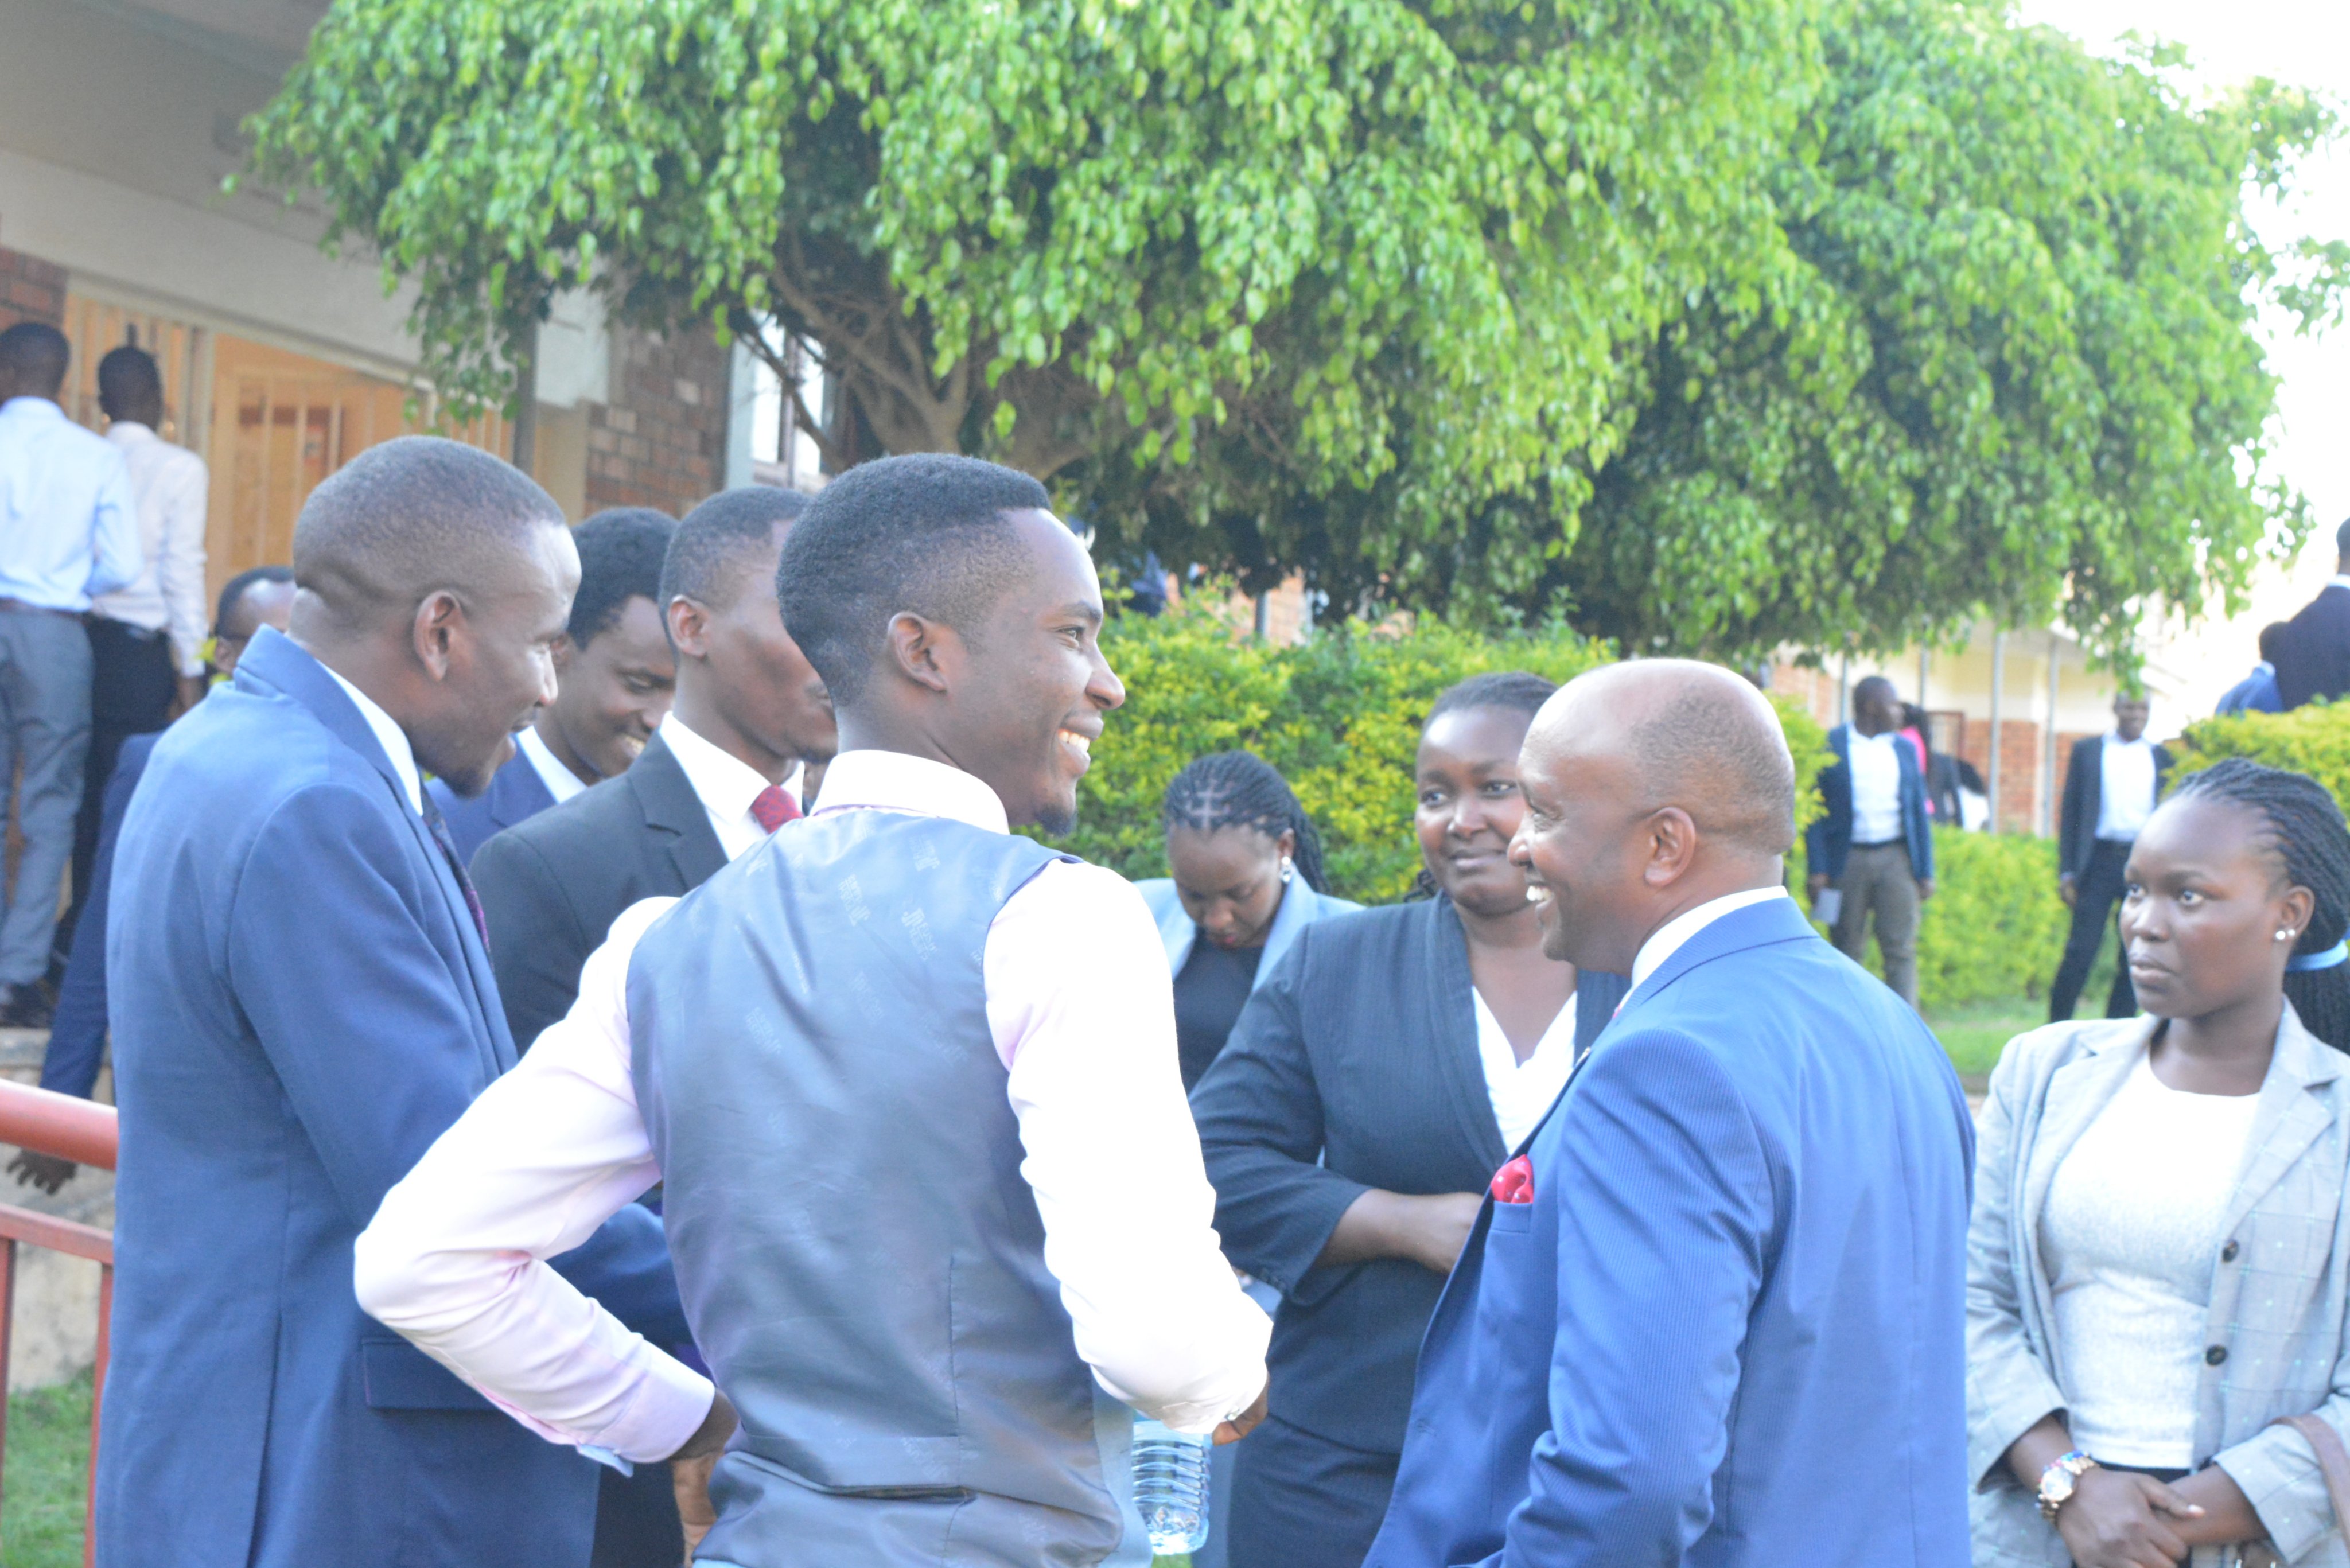 A section of Law students share a light moment with the Guest Speaker, Counsel Naboth immediately after the Symposium